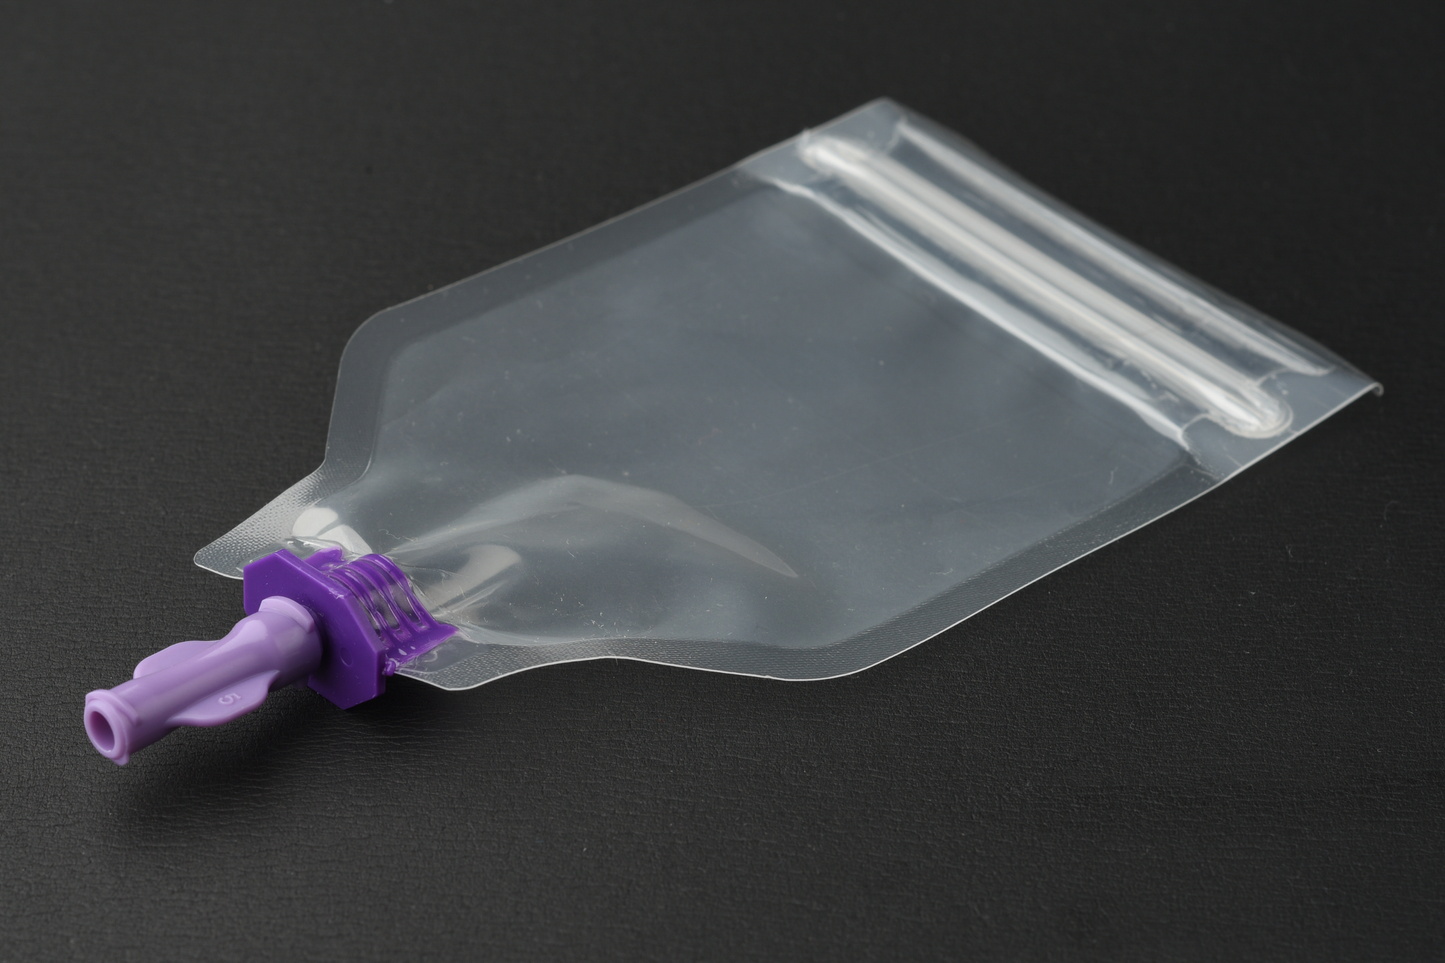 Sideway Capture of Locking ENFit Connecting Pill Pouch to Leur Syringe